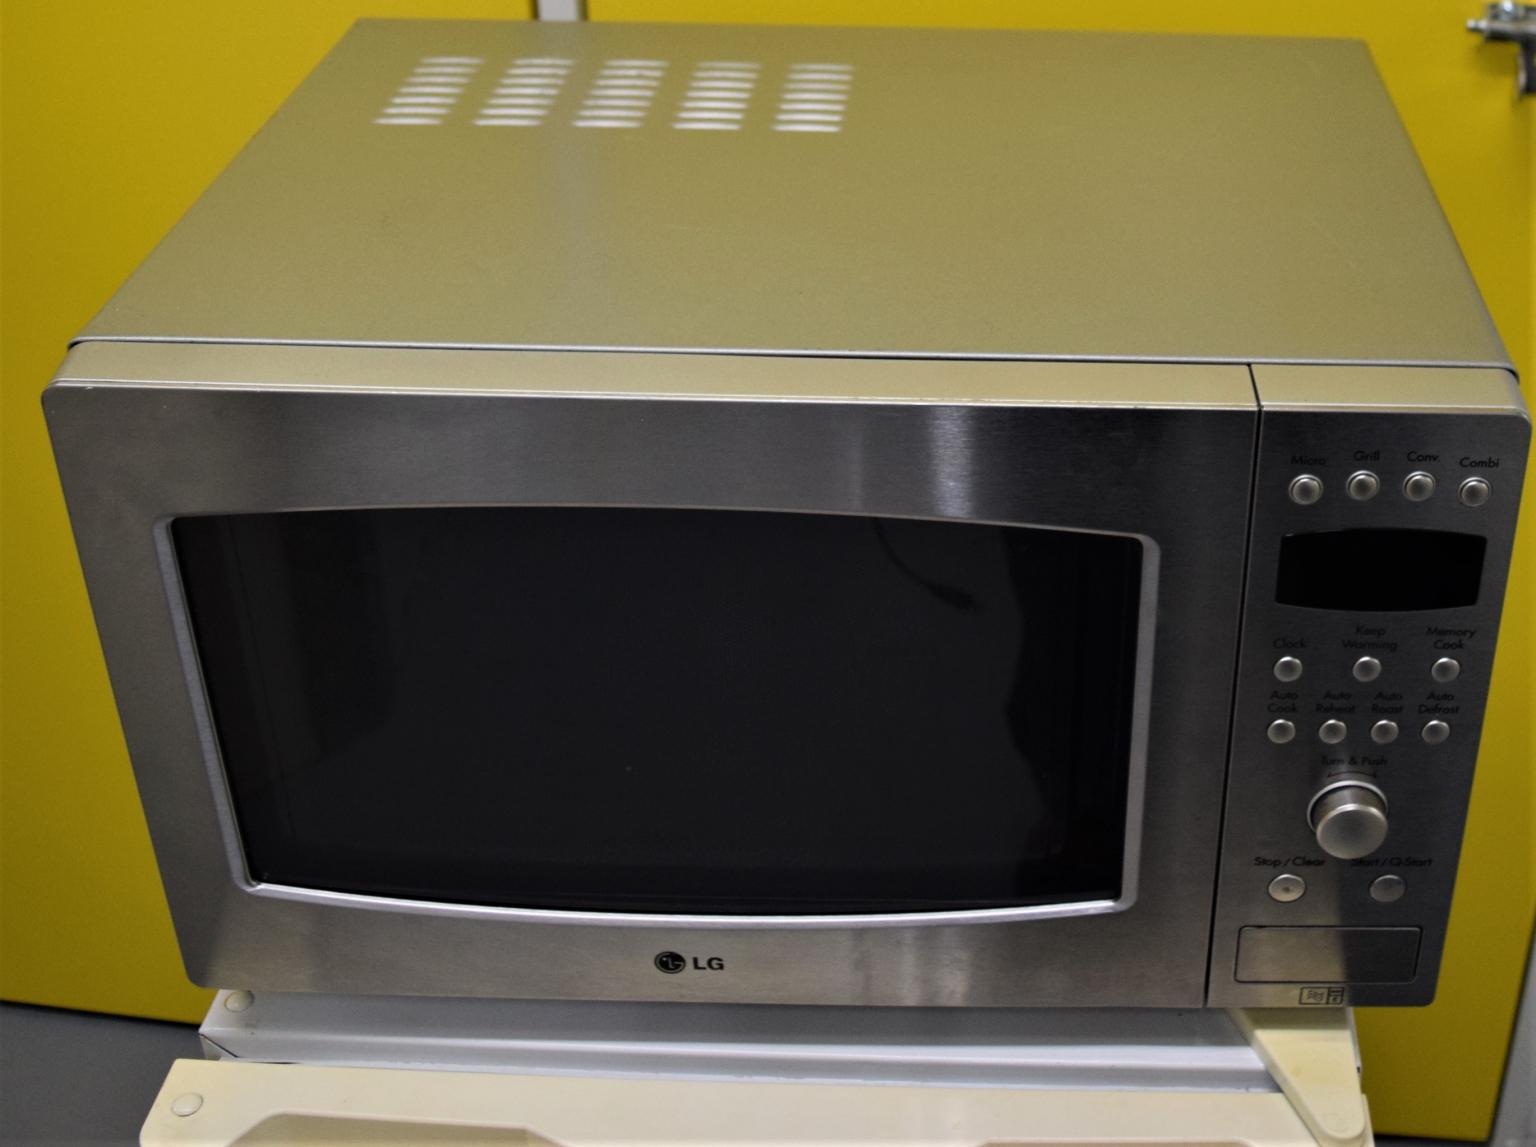 LG Microwave Oven Good Condition in TW8 London for £29.99 for sale Shpock